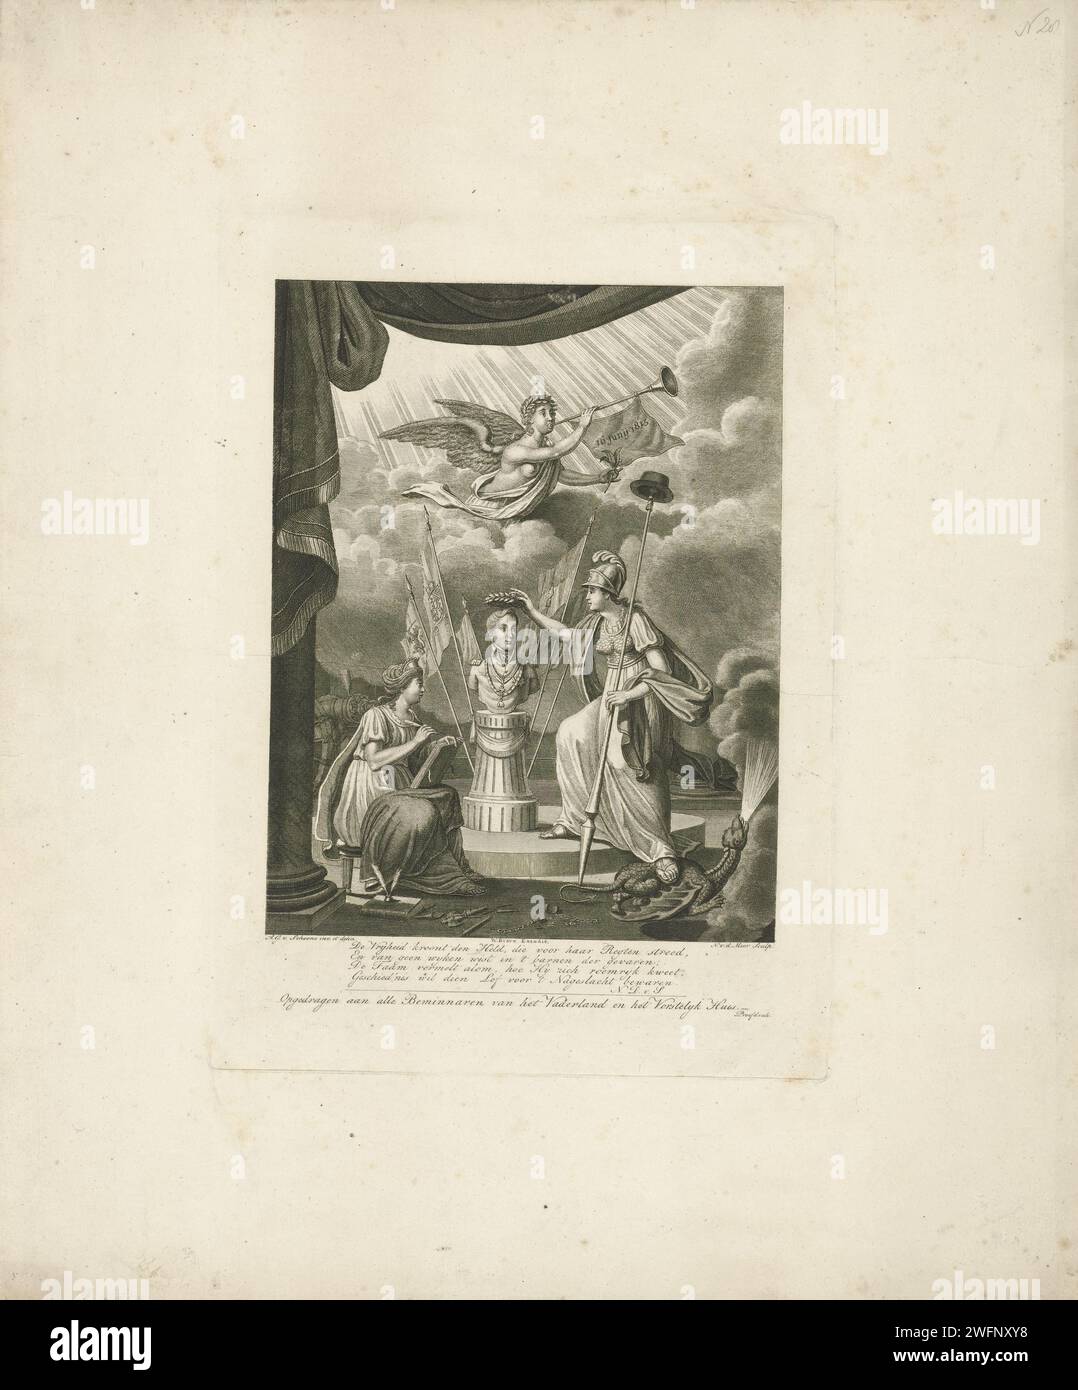 Dutch Virgin crowns the bust of Crown Prince Willem II, Noah van der Meer (II), After Adrianus Gerardus van Schoone, 1815 print The Dutch Virgin, standing on the monster of the Dwingelandij and with the lance of freedom in her hand, lauert a bust of crown prince Willem II of Orange. Next to the bust is history, which records the heroic deeds of the prince. The fame blows the praise, on which a banner hangs with the date of the Battle of Quatre-Bras. At the bottom of the margin a four -line verse and the assignment. Amsterdam paper etching historical persons (portraits and scenes from the life) Stock Photo